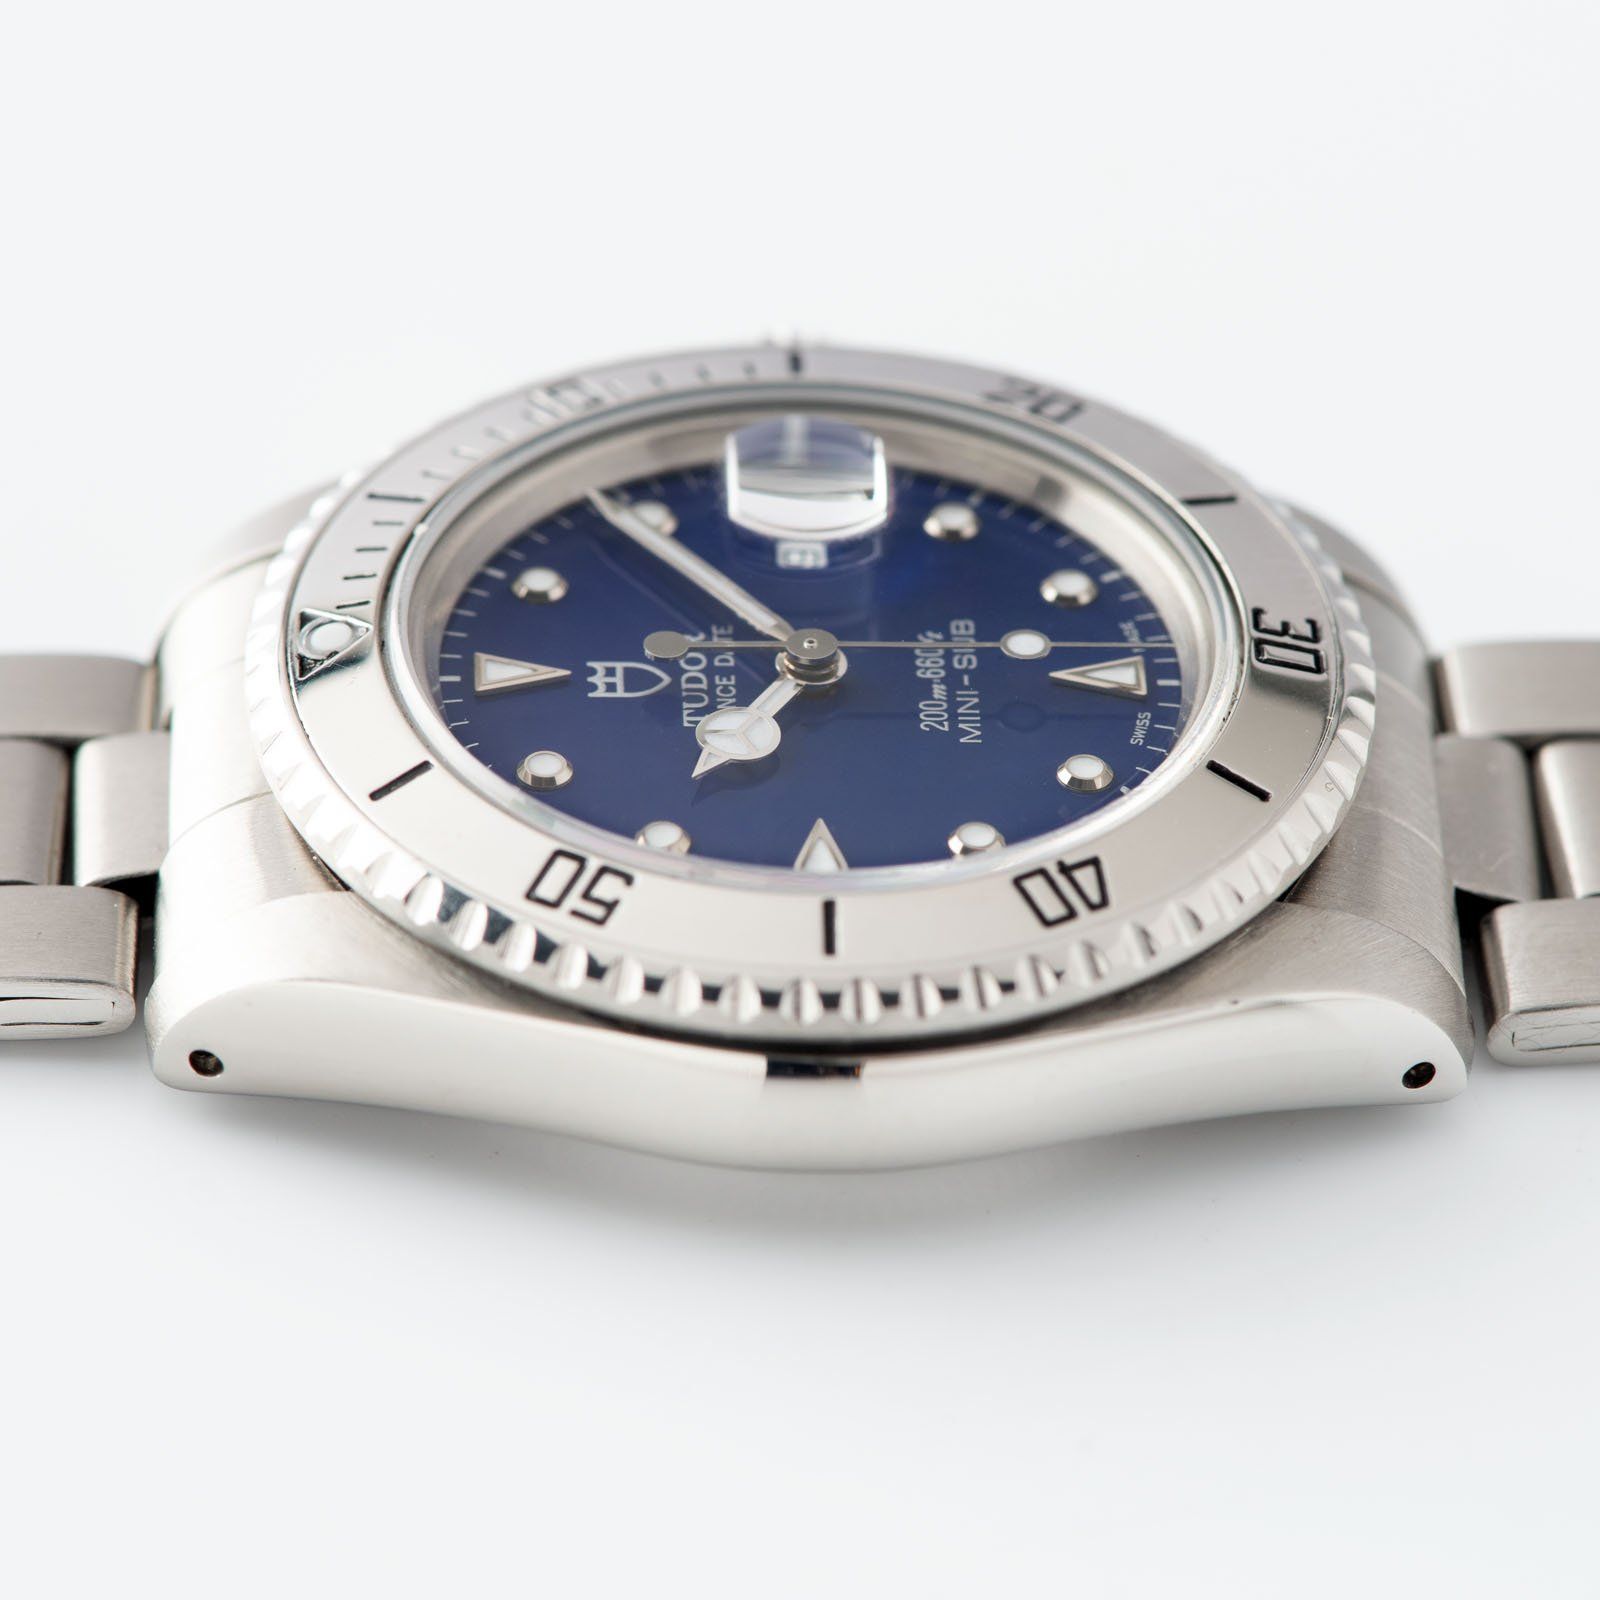 Tudor Submariner Prince Date Gloss Blue Dial Reference 73190